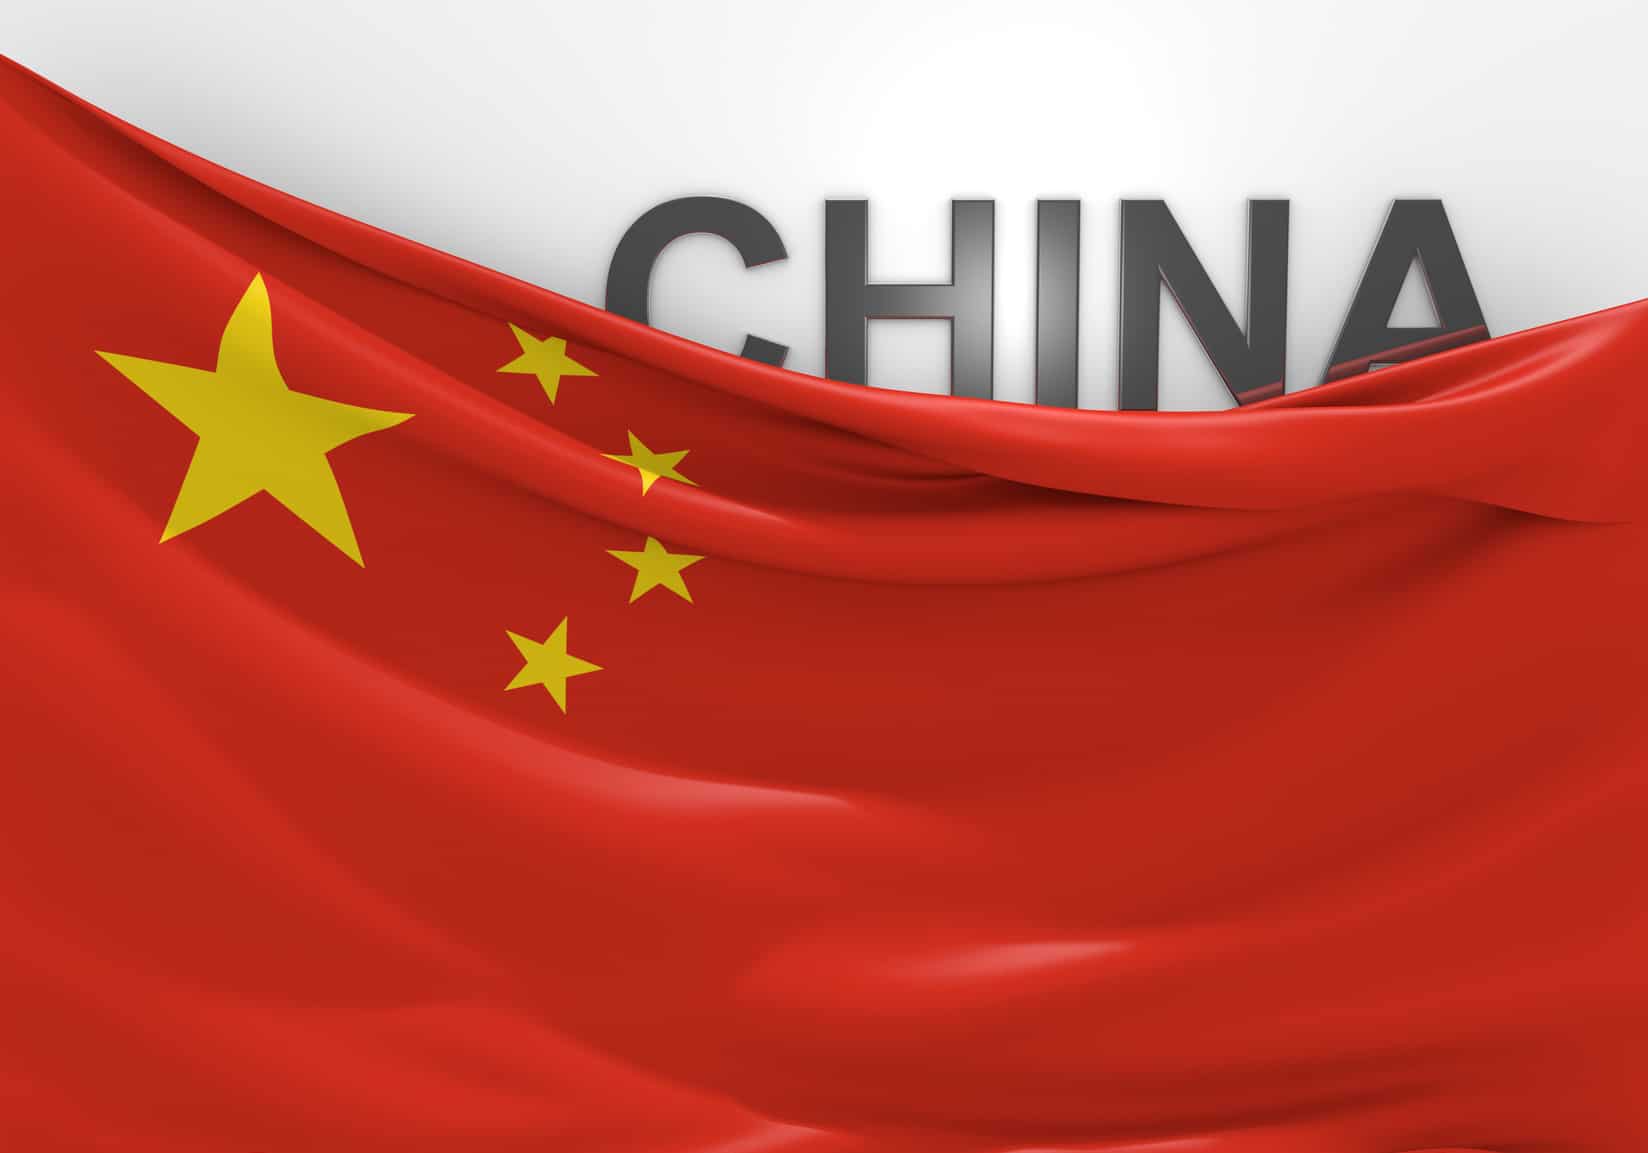 Chinese flag and text "China."